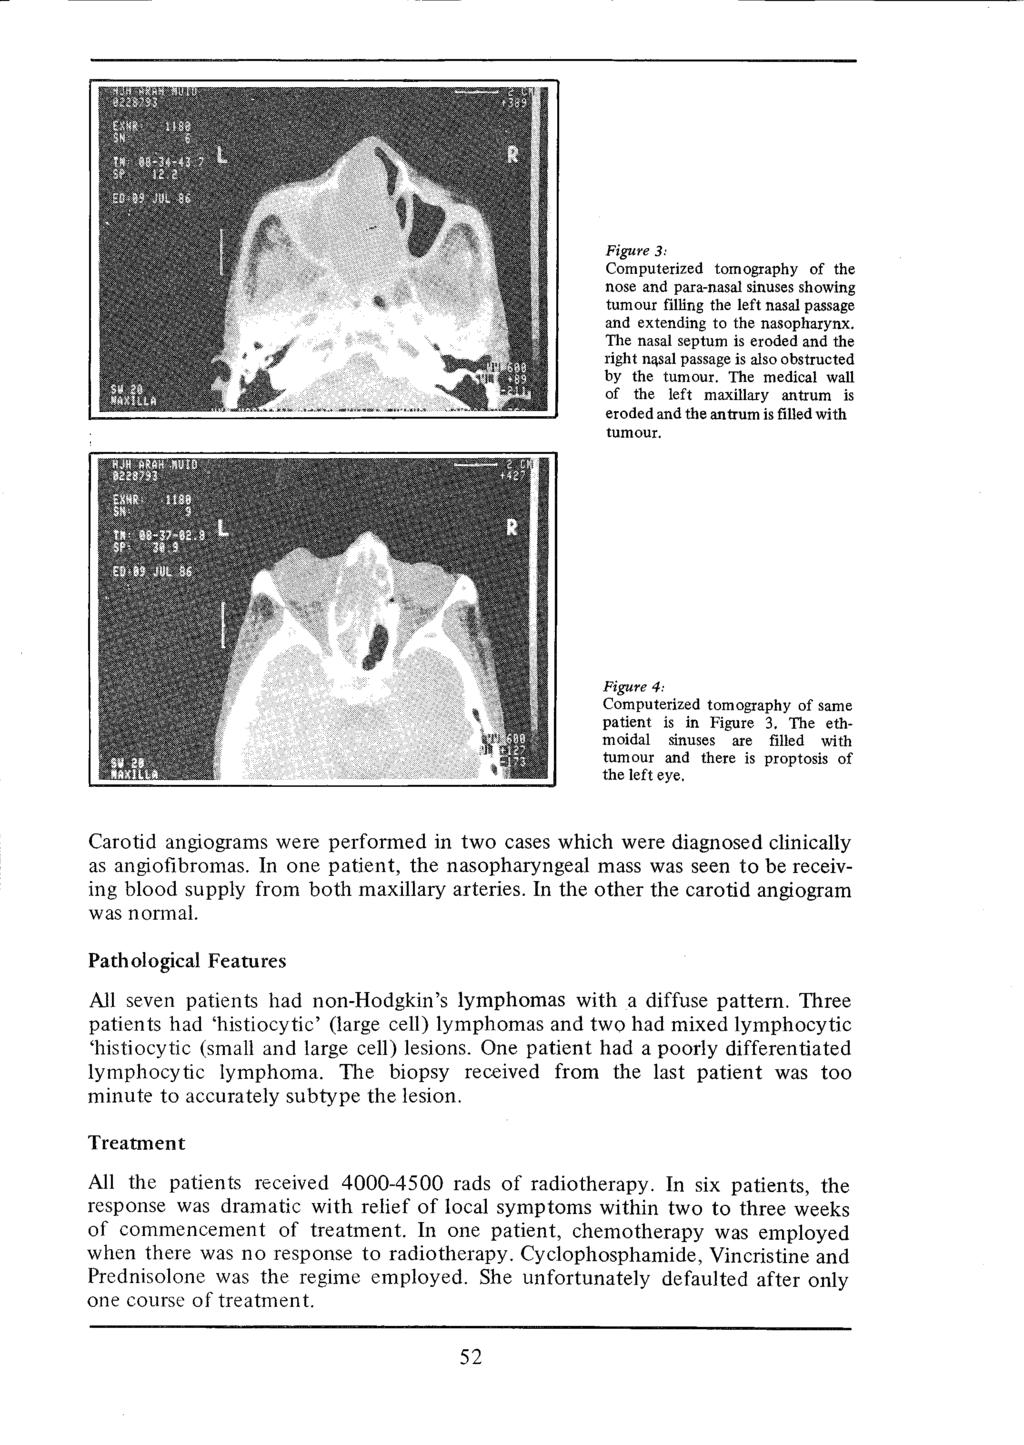 Figure 3: Computerized tomography of the nose and para-nasal sinuses showing tum our filling the left nasal passage and extending to the nasopharynx.